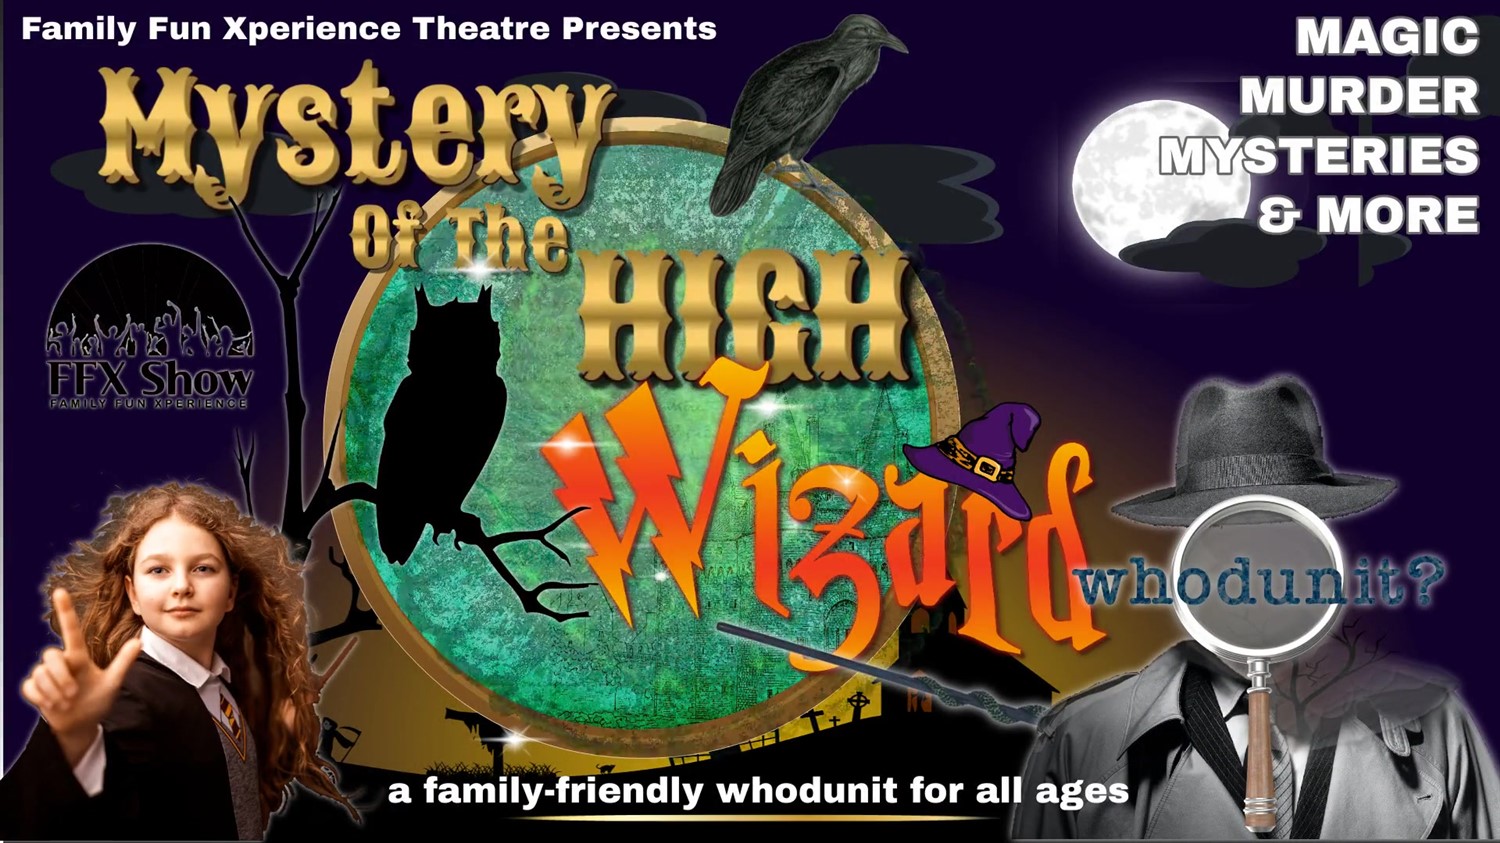 Whodunit? MYSTERY OF THE HIGH WIZARD Matineé Matineé Mystery + Game Show on Oct 21, 14:00@FFX Theatre - Pick a seat, Buy tickets and Get information on Family Fun Xperience tickets.ffxshow.org